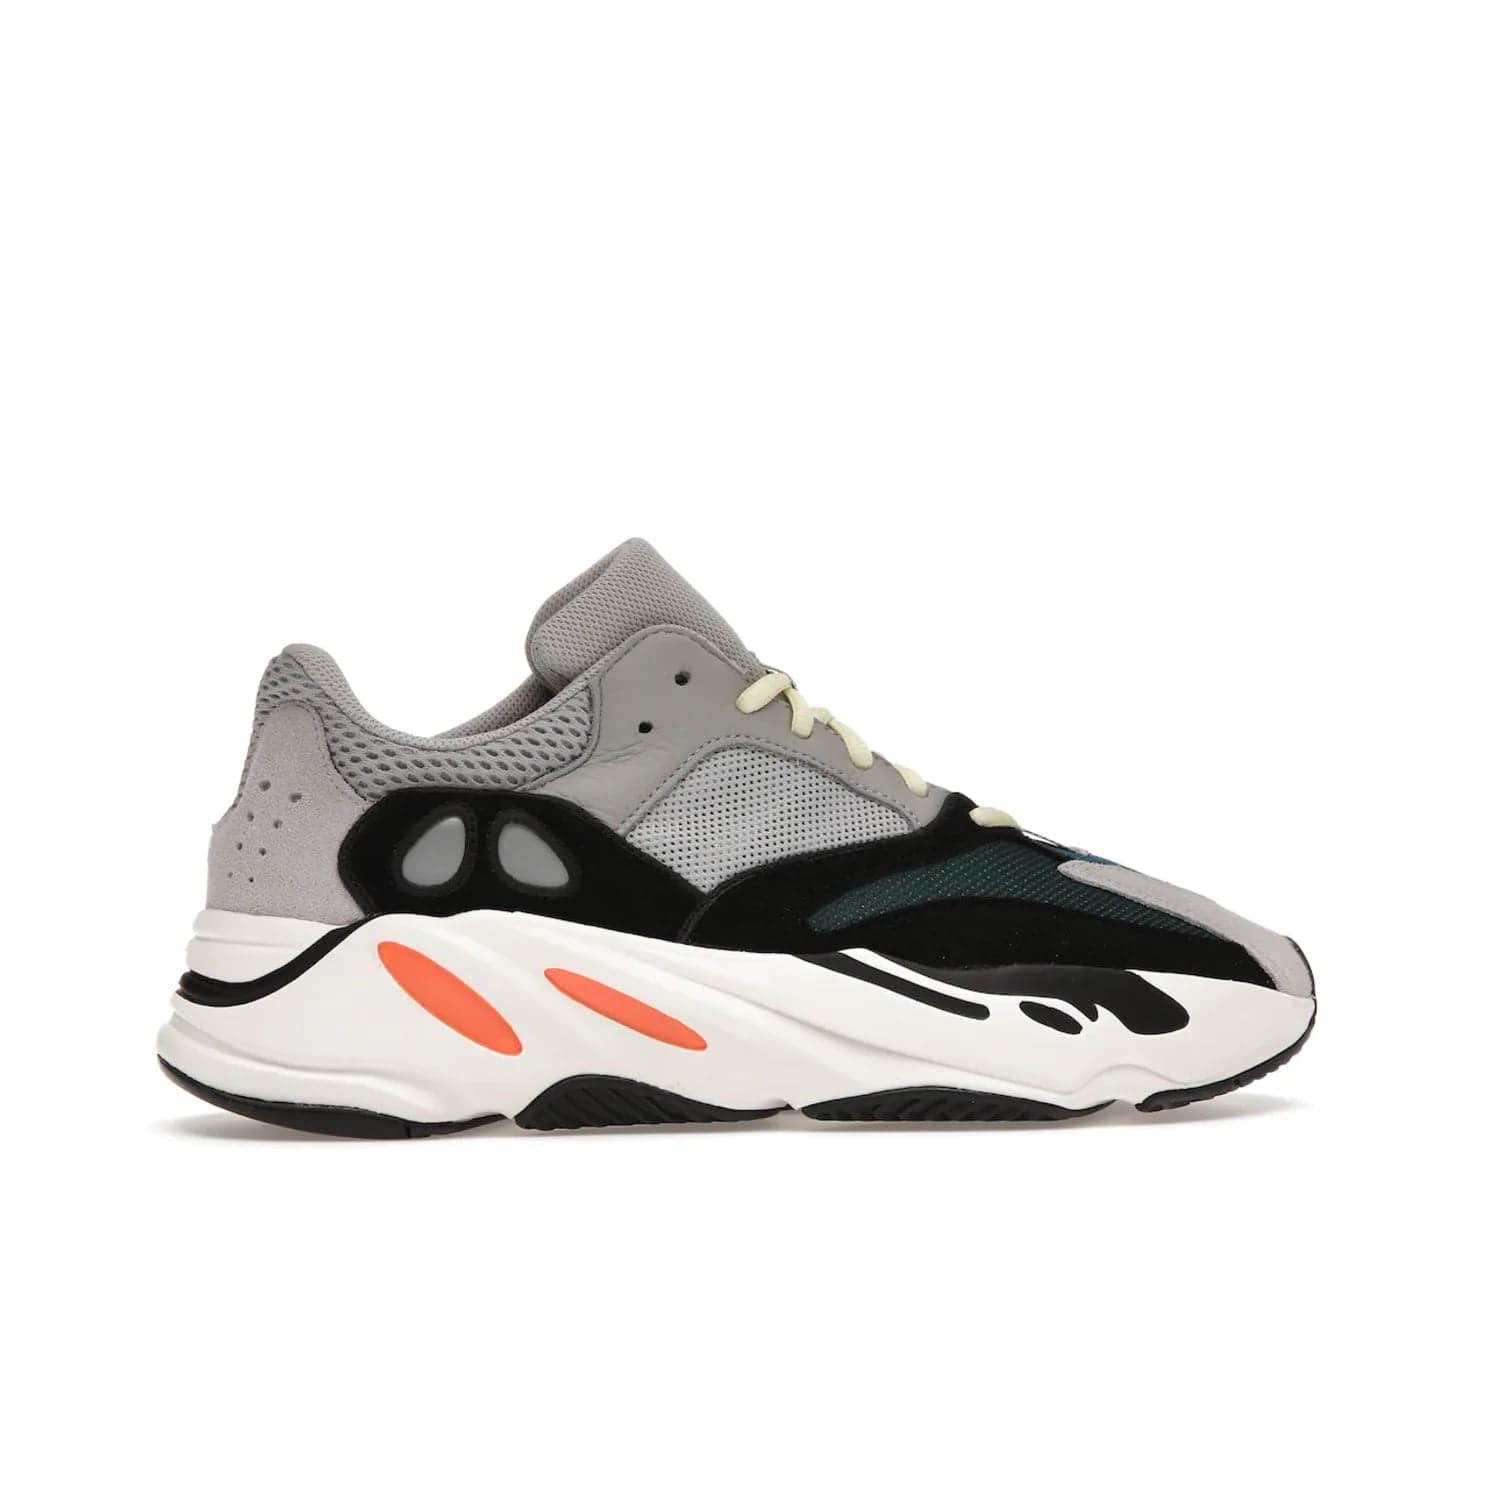 adidas Yeezy Boost 700 Wave Runner - Image 36 - Only at www.BallersClubKickz.com - Shop the iconic adidas Yeezy Boost 700 Wave Runner. Featuring grey mesh and leather upper, black suede overlays, teal mesh underlays, and signature Boost sole. Be bold & make a statement.